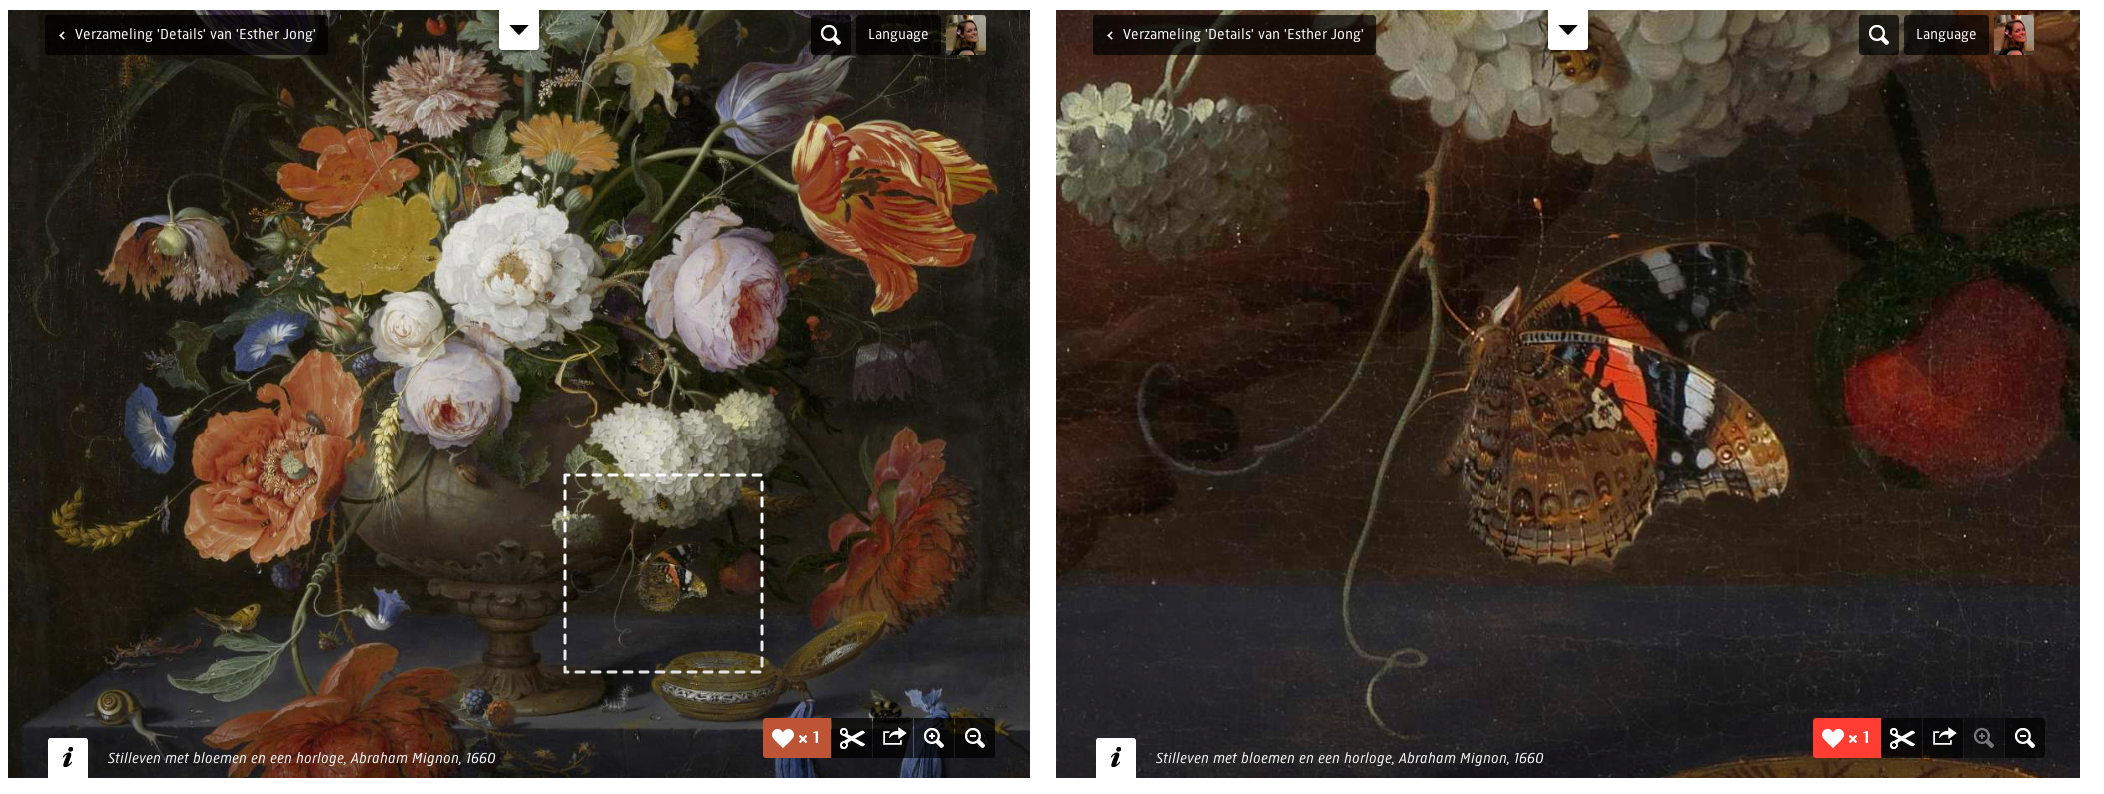 Showing screenshots of the Rijksstudio (left flowers, right a butterfly)